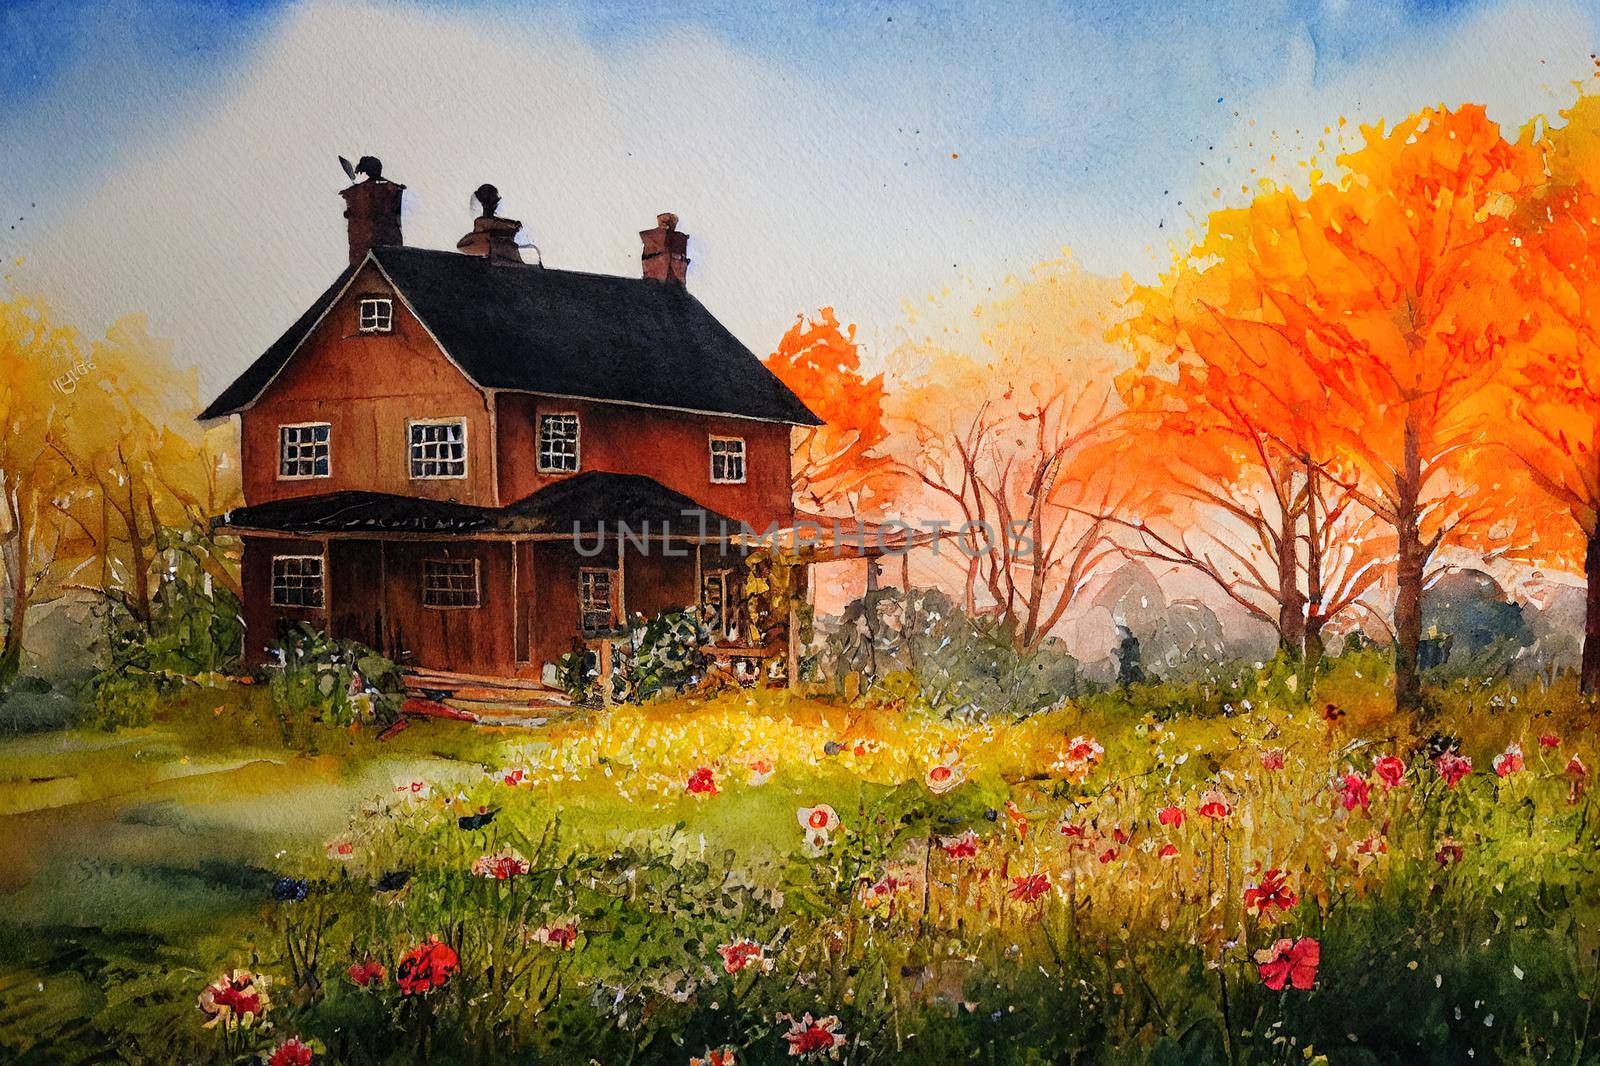 hand drawn watercolor painting of country house autumn. landscape painting with building, wooden house, front yard, garden, grass, colorful flowers, trees, foliage and sunny sky for print, etc. High quality illustration